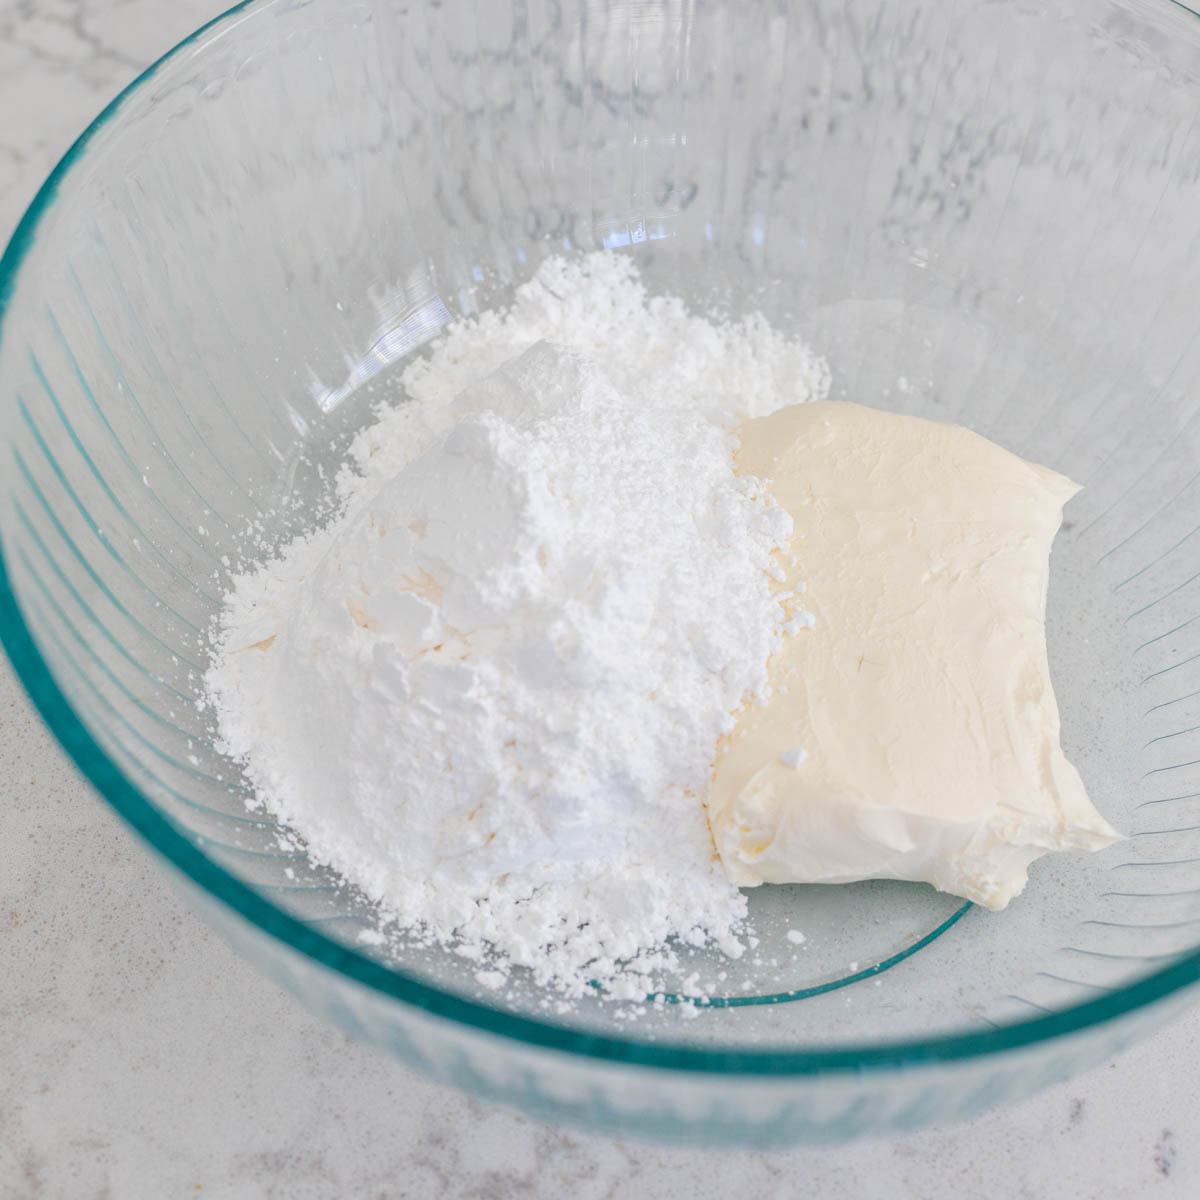 The Cream Cheese and Powdered Sugar are in a mixing bowl.